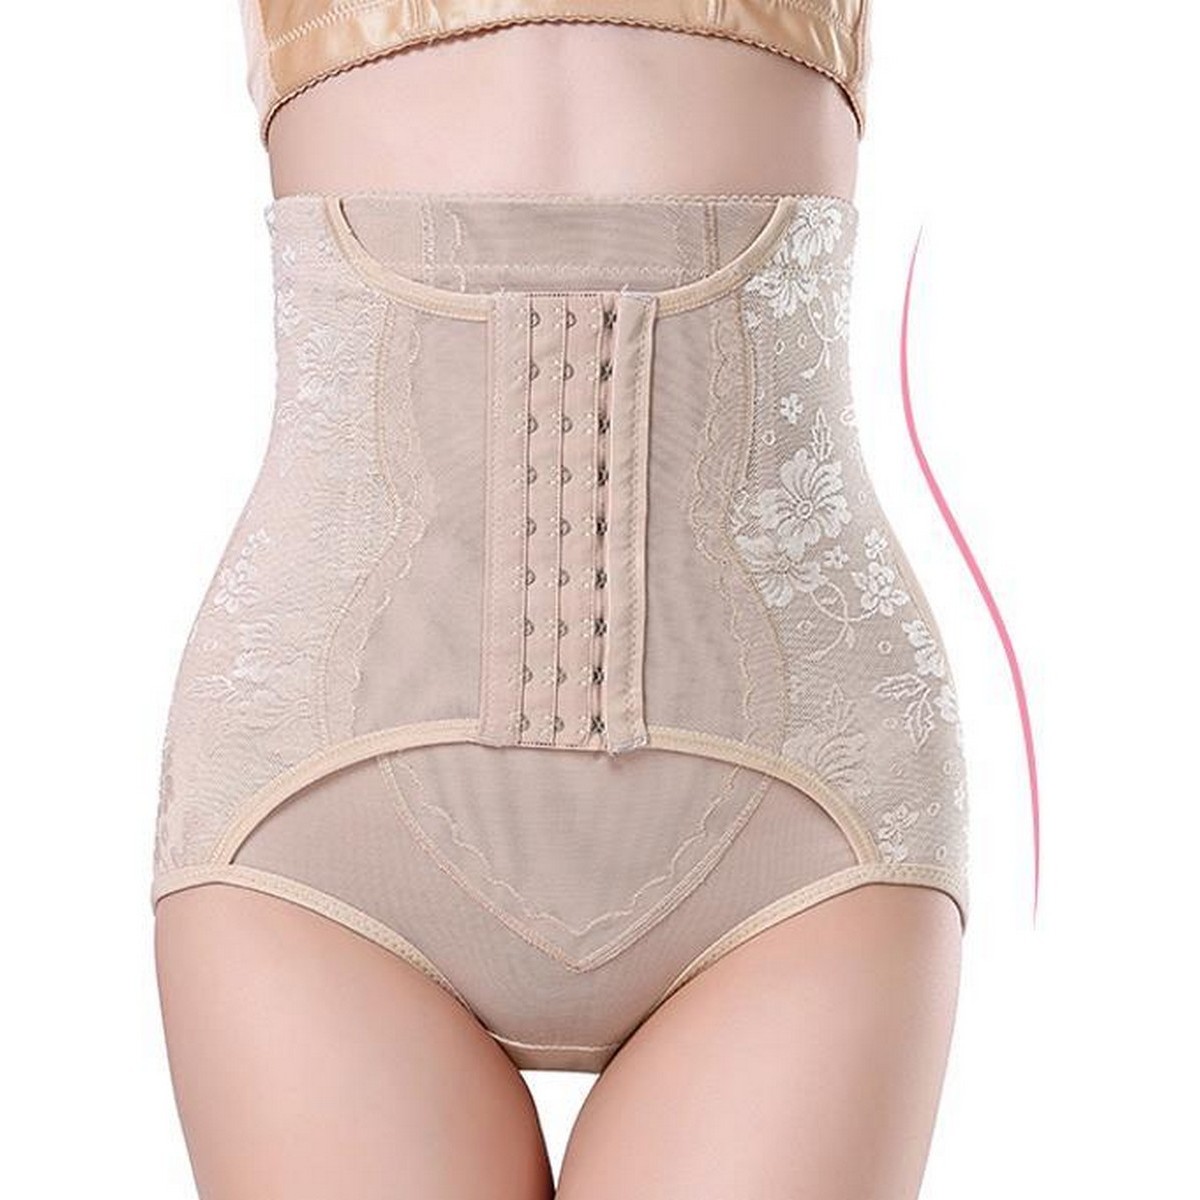 High Waist Control Panties For Women Belly Slimming Body Shaper